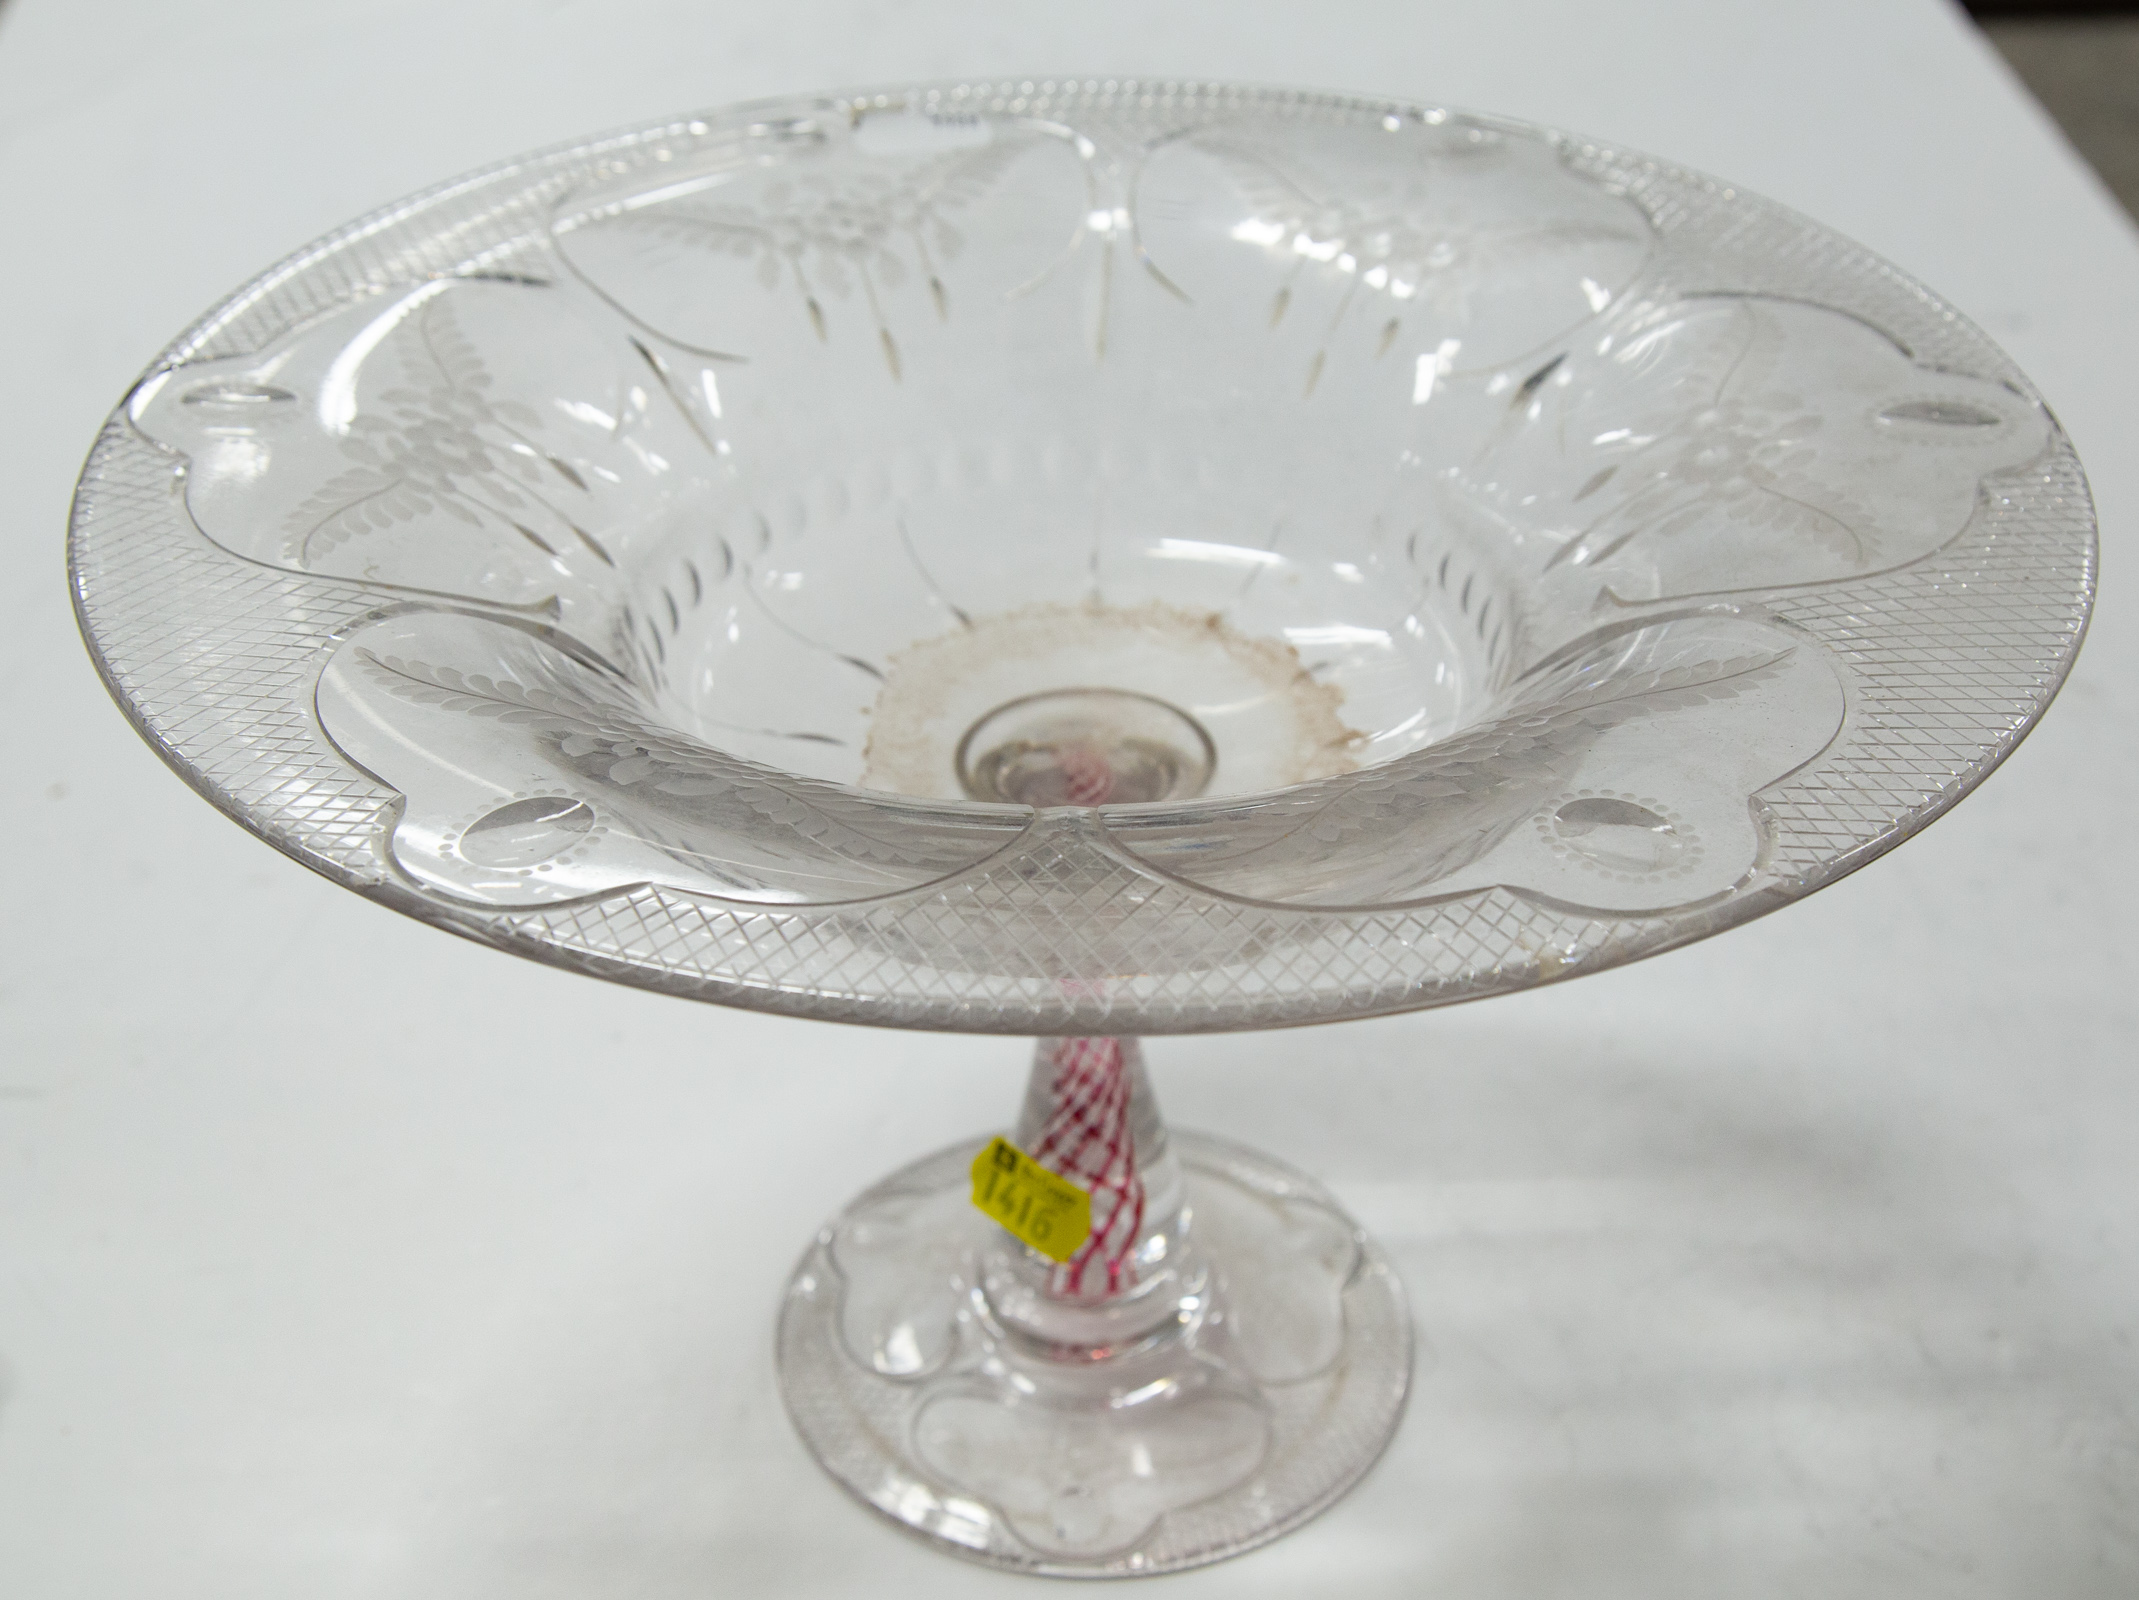 ORNATE ETCHED GLASS COMPOTE Possibly